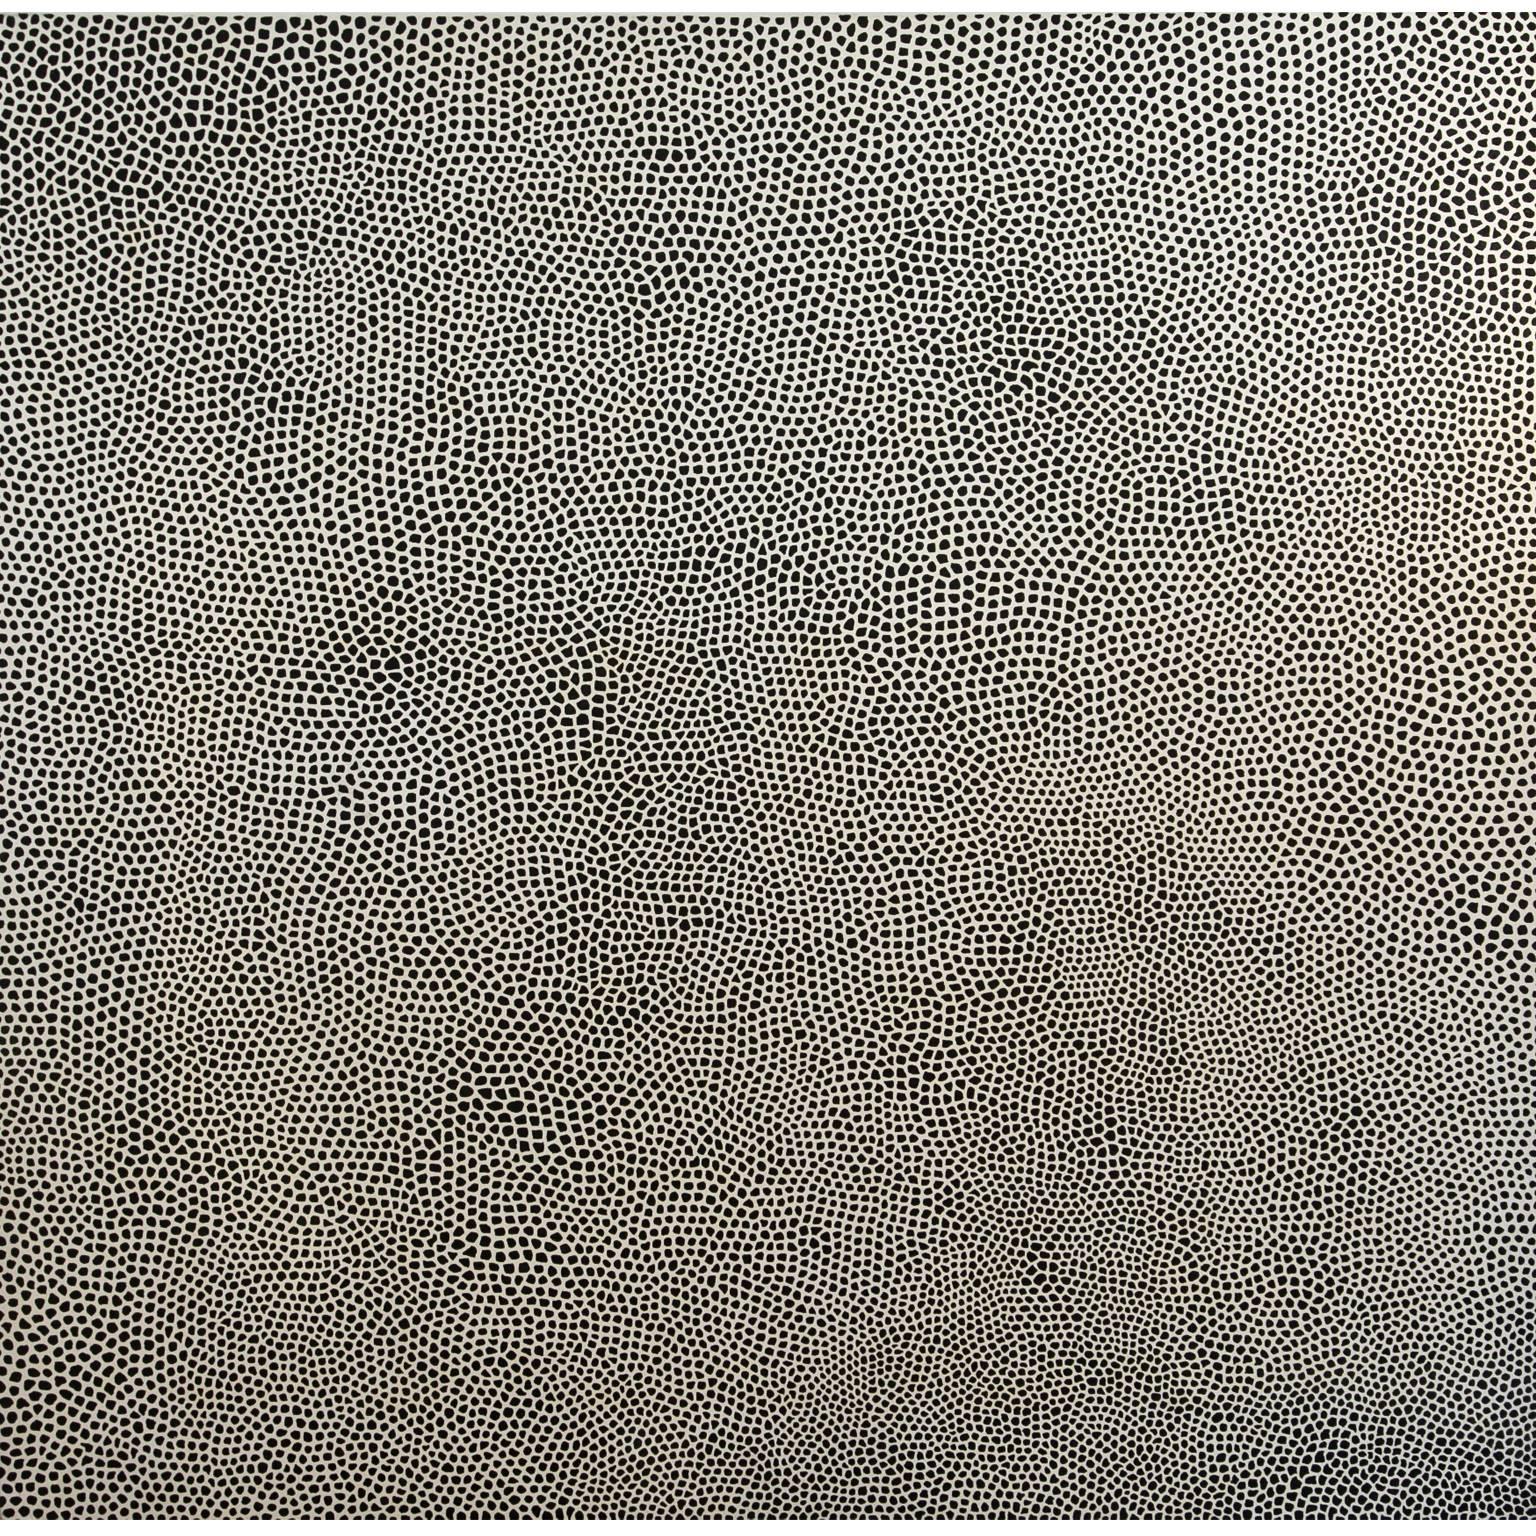 Large painting by German artist Peter Kampehl (born 1947, lives and works in Nuremberg) titled "Staub in der Sonne" (engl. "dust in the sun"). The grey-beige backdrop was covered in a meticulous work with black dots that become